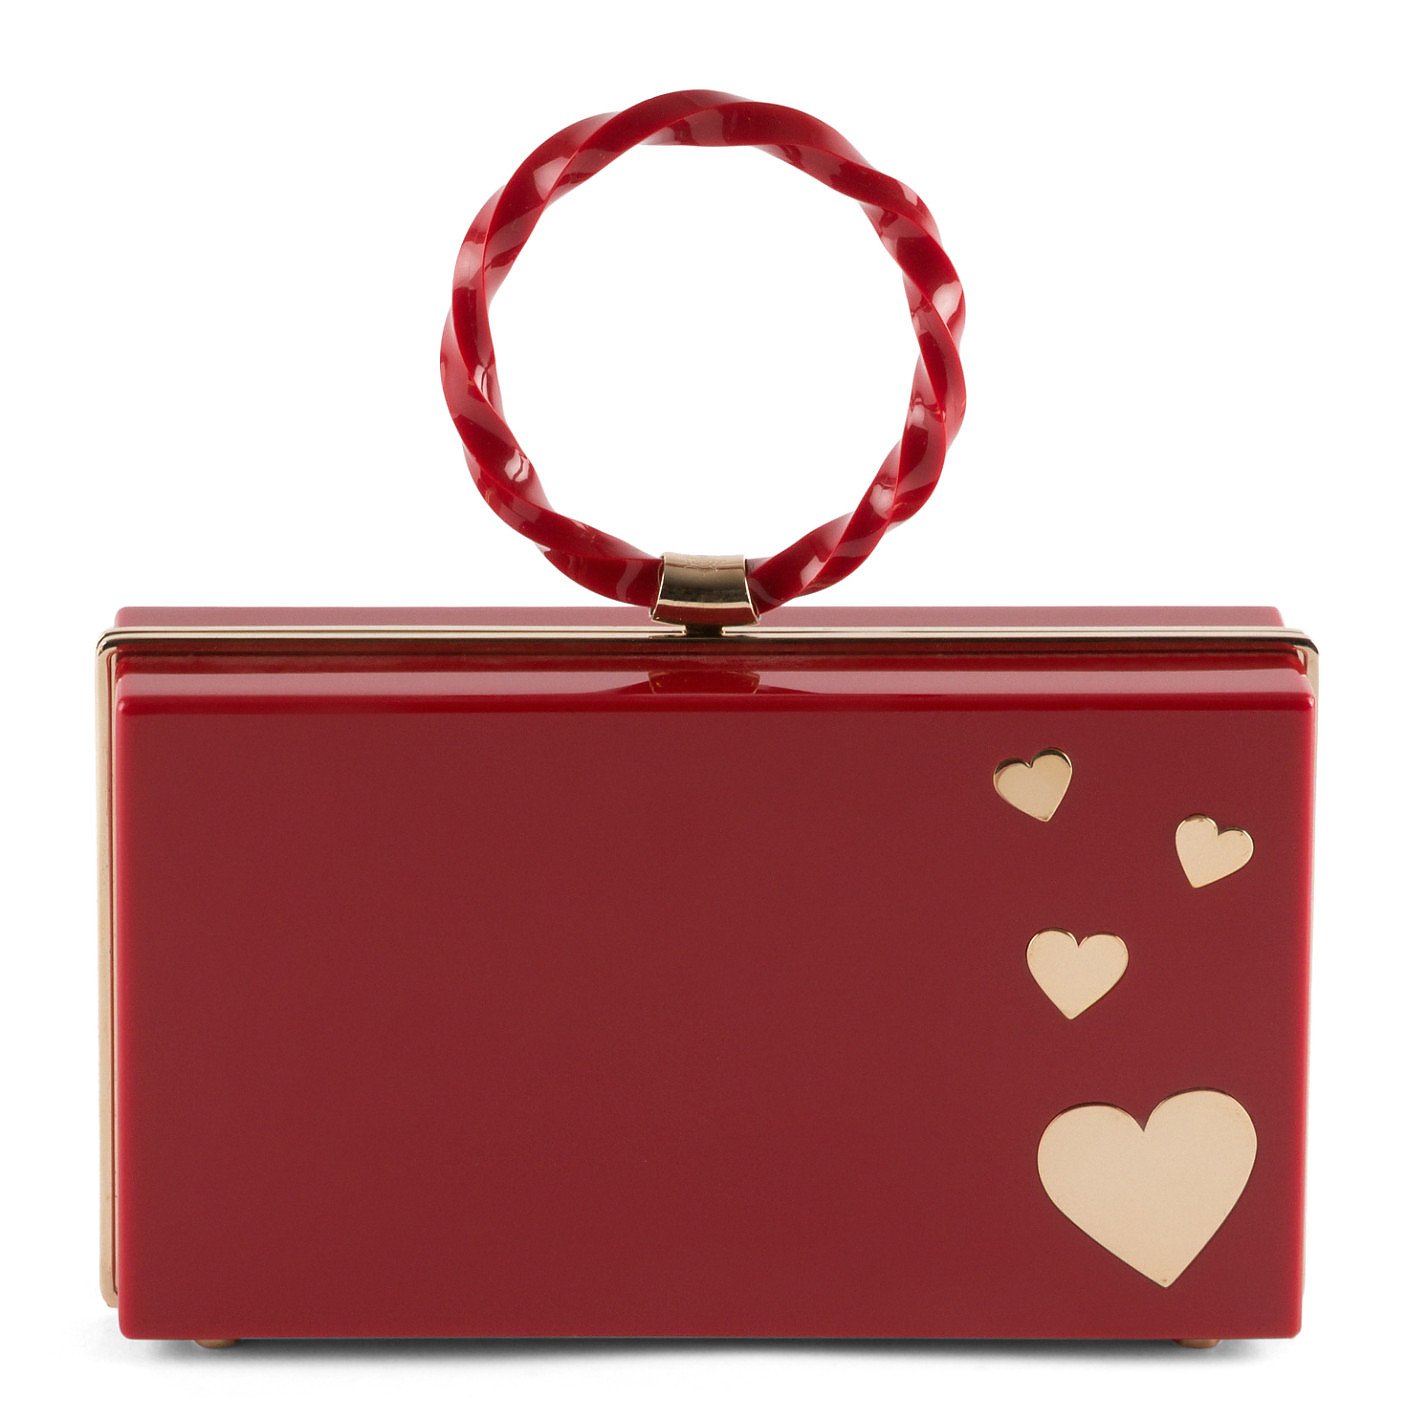 Charlotte Olympia Heart Perspex Clutch With Top Handle